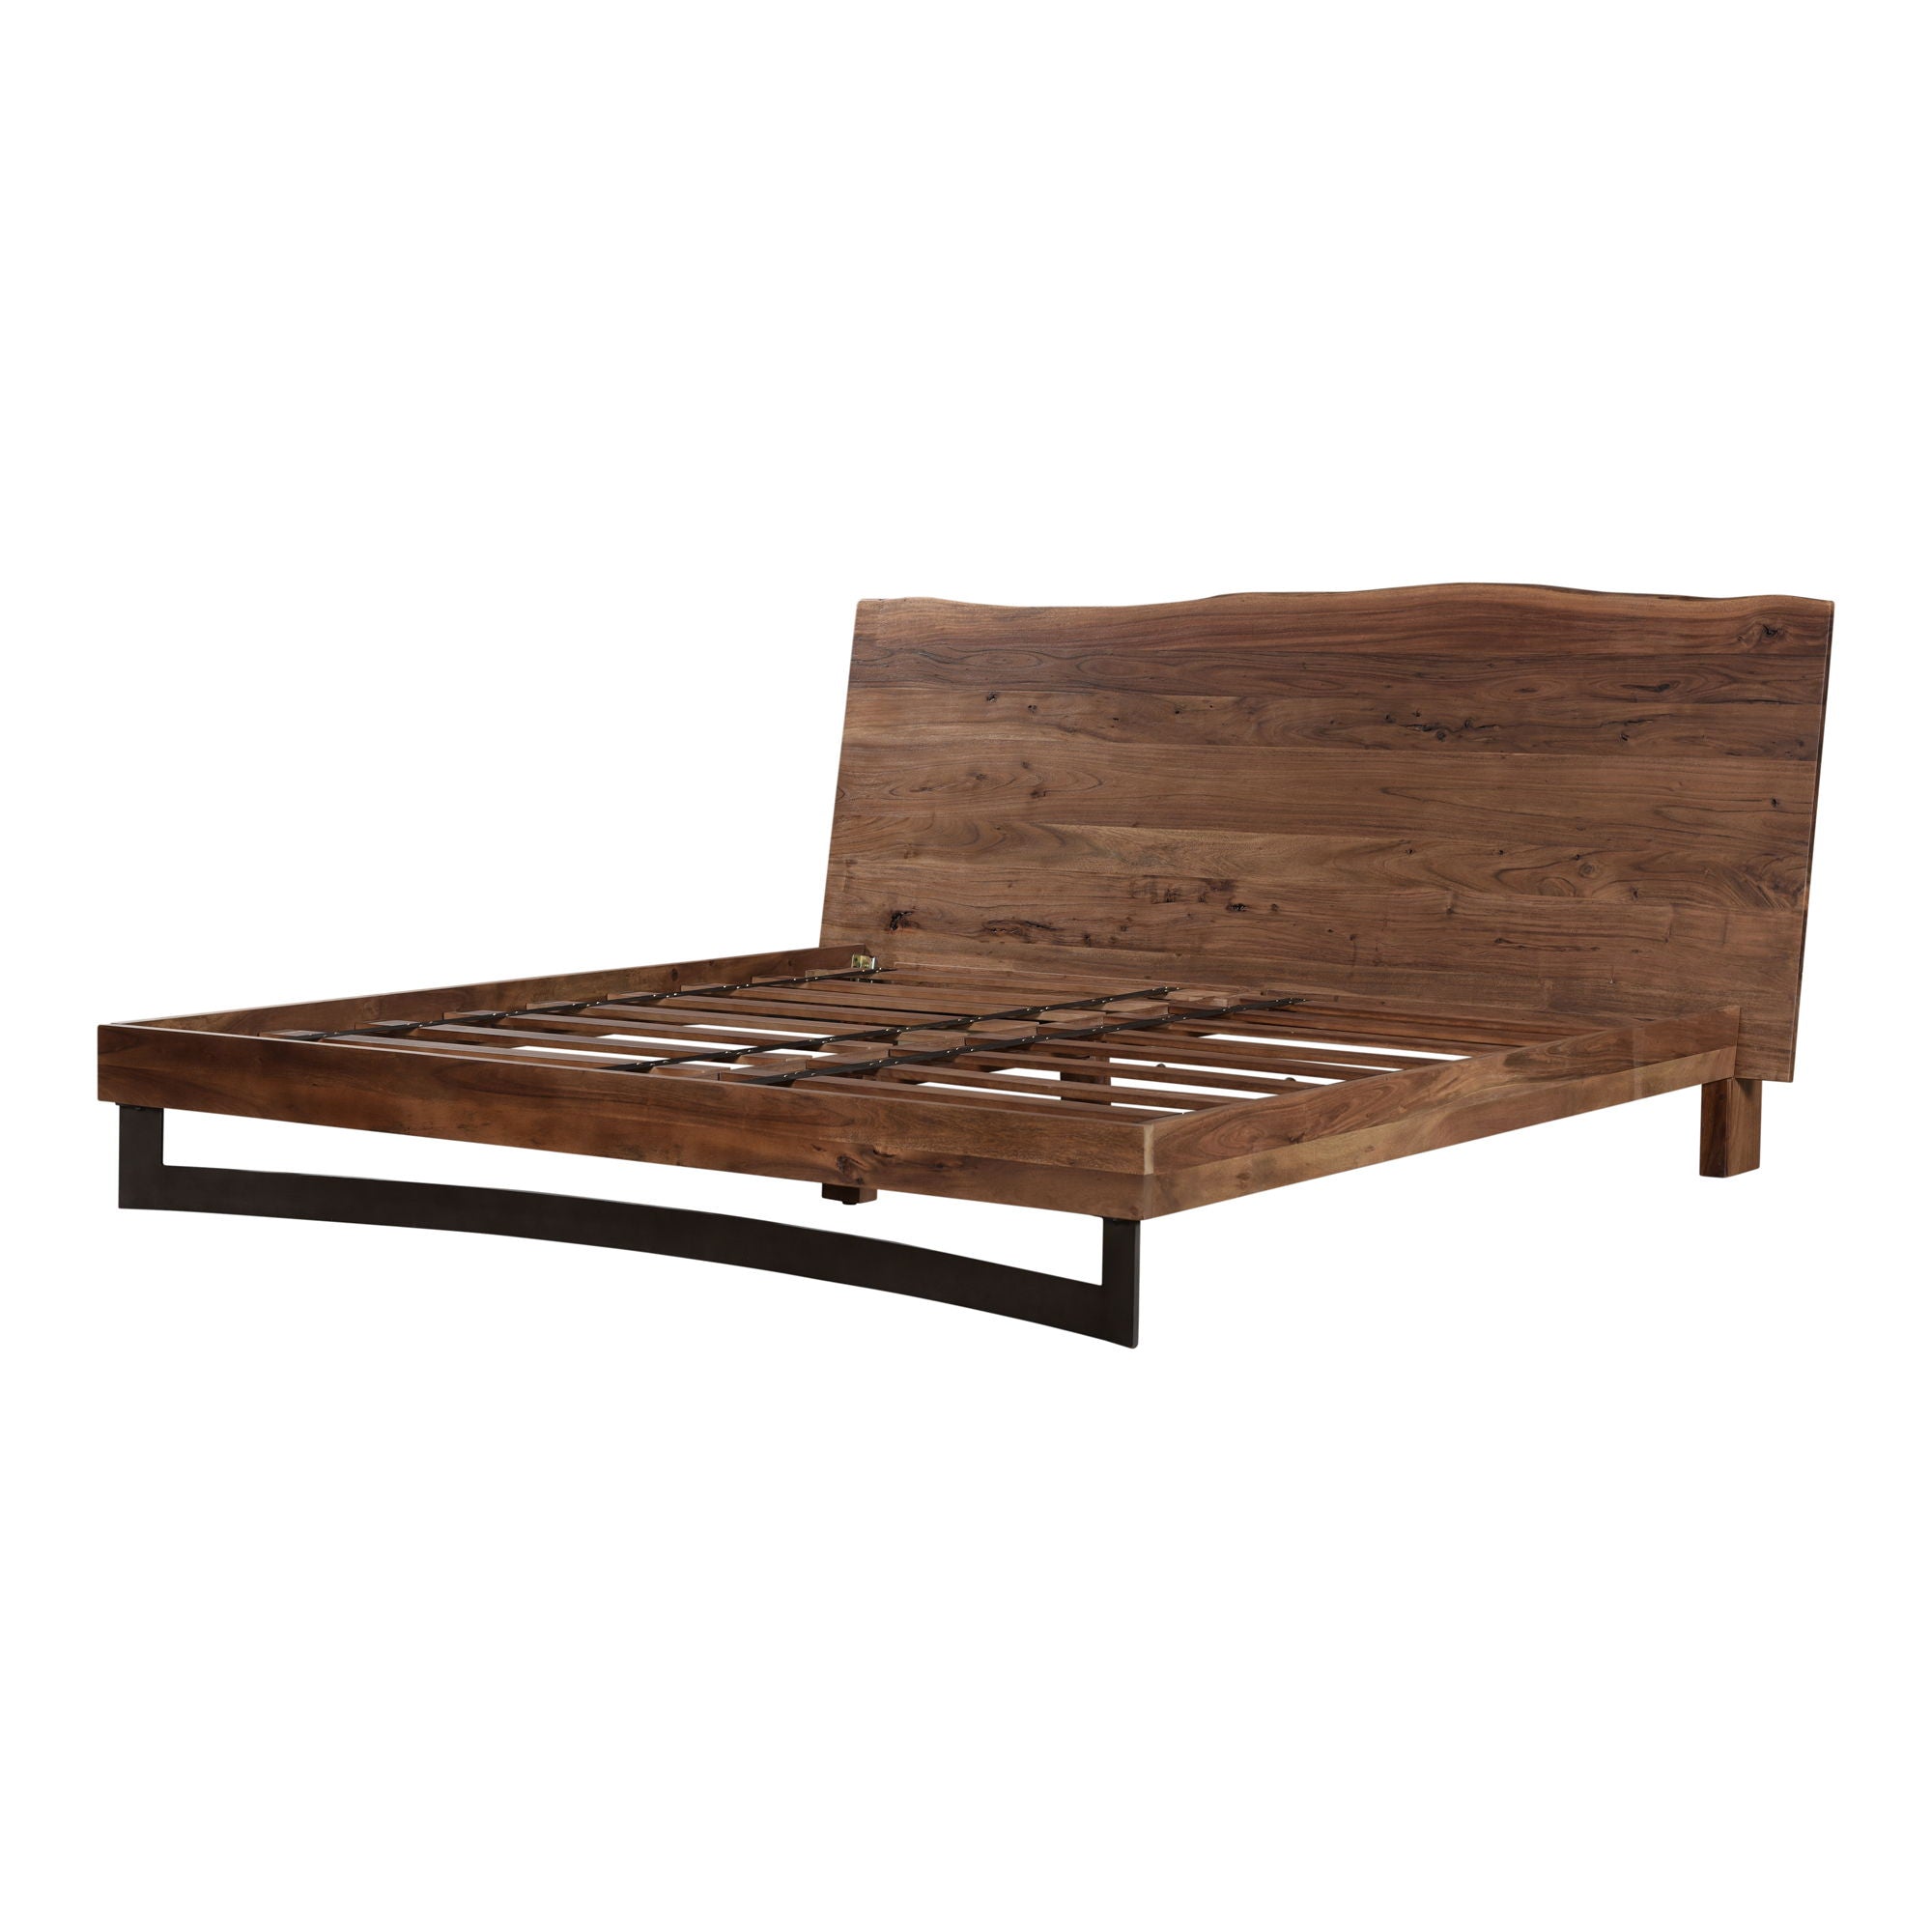 Bent - King Size Bed - Natural Stain